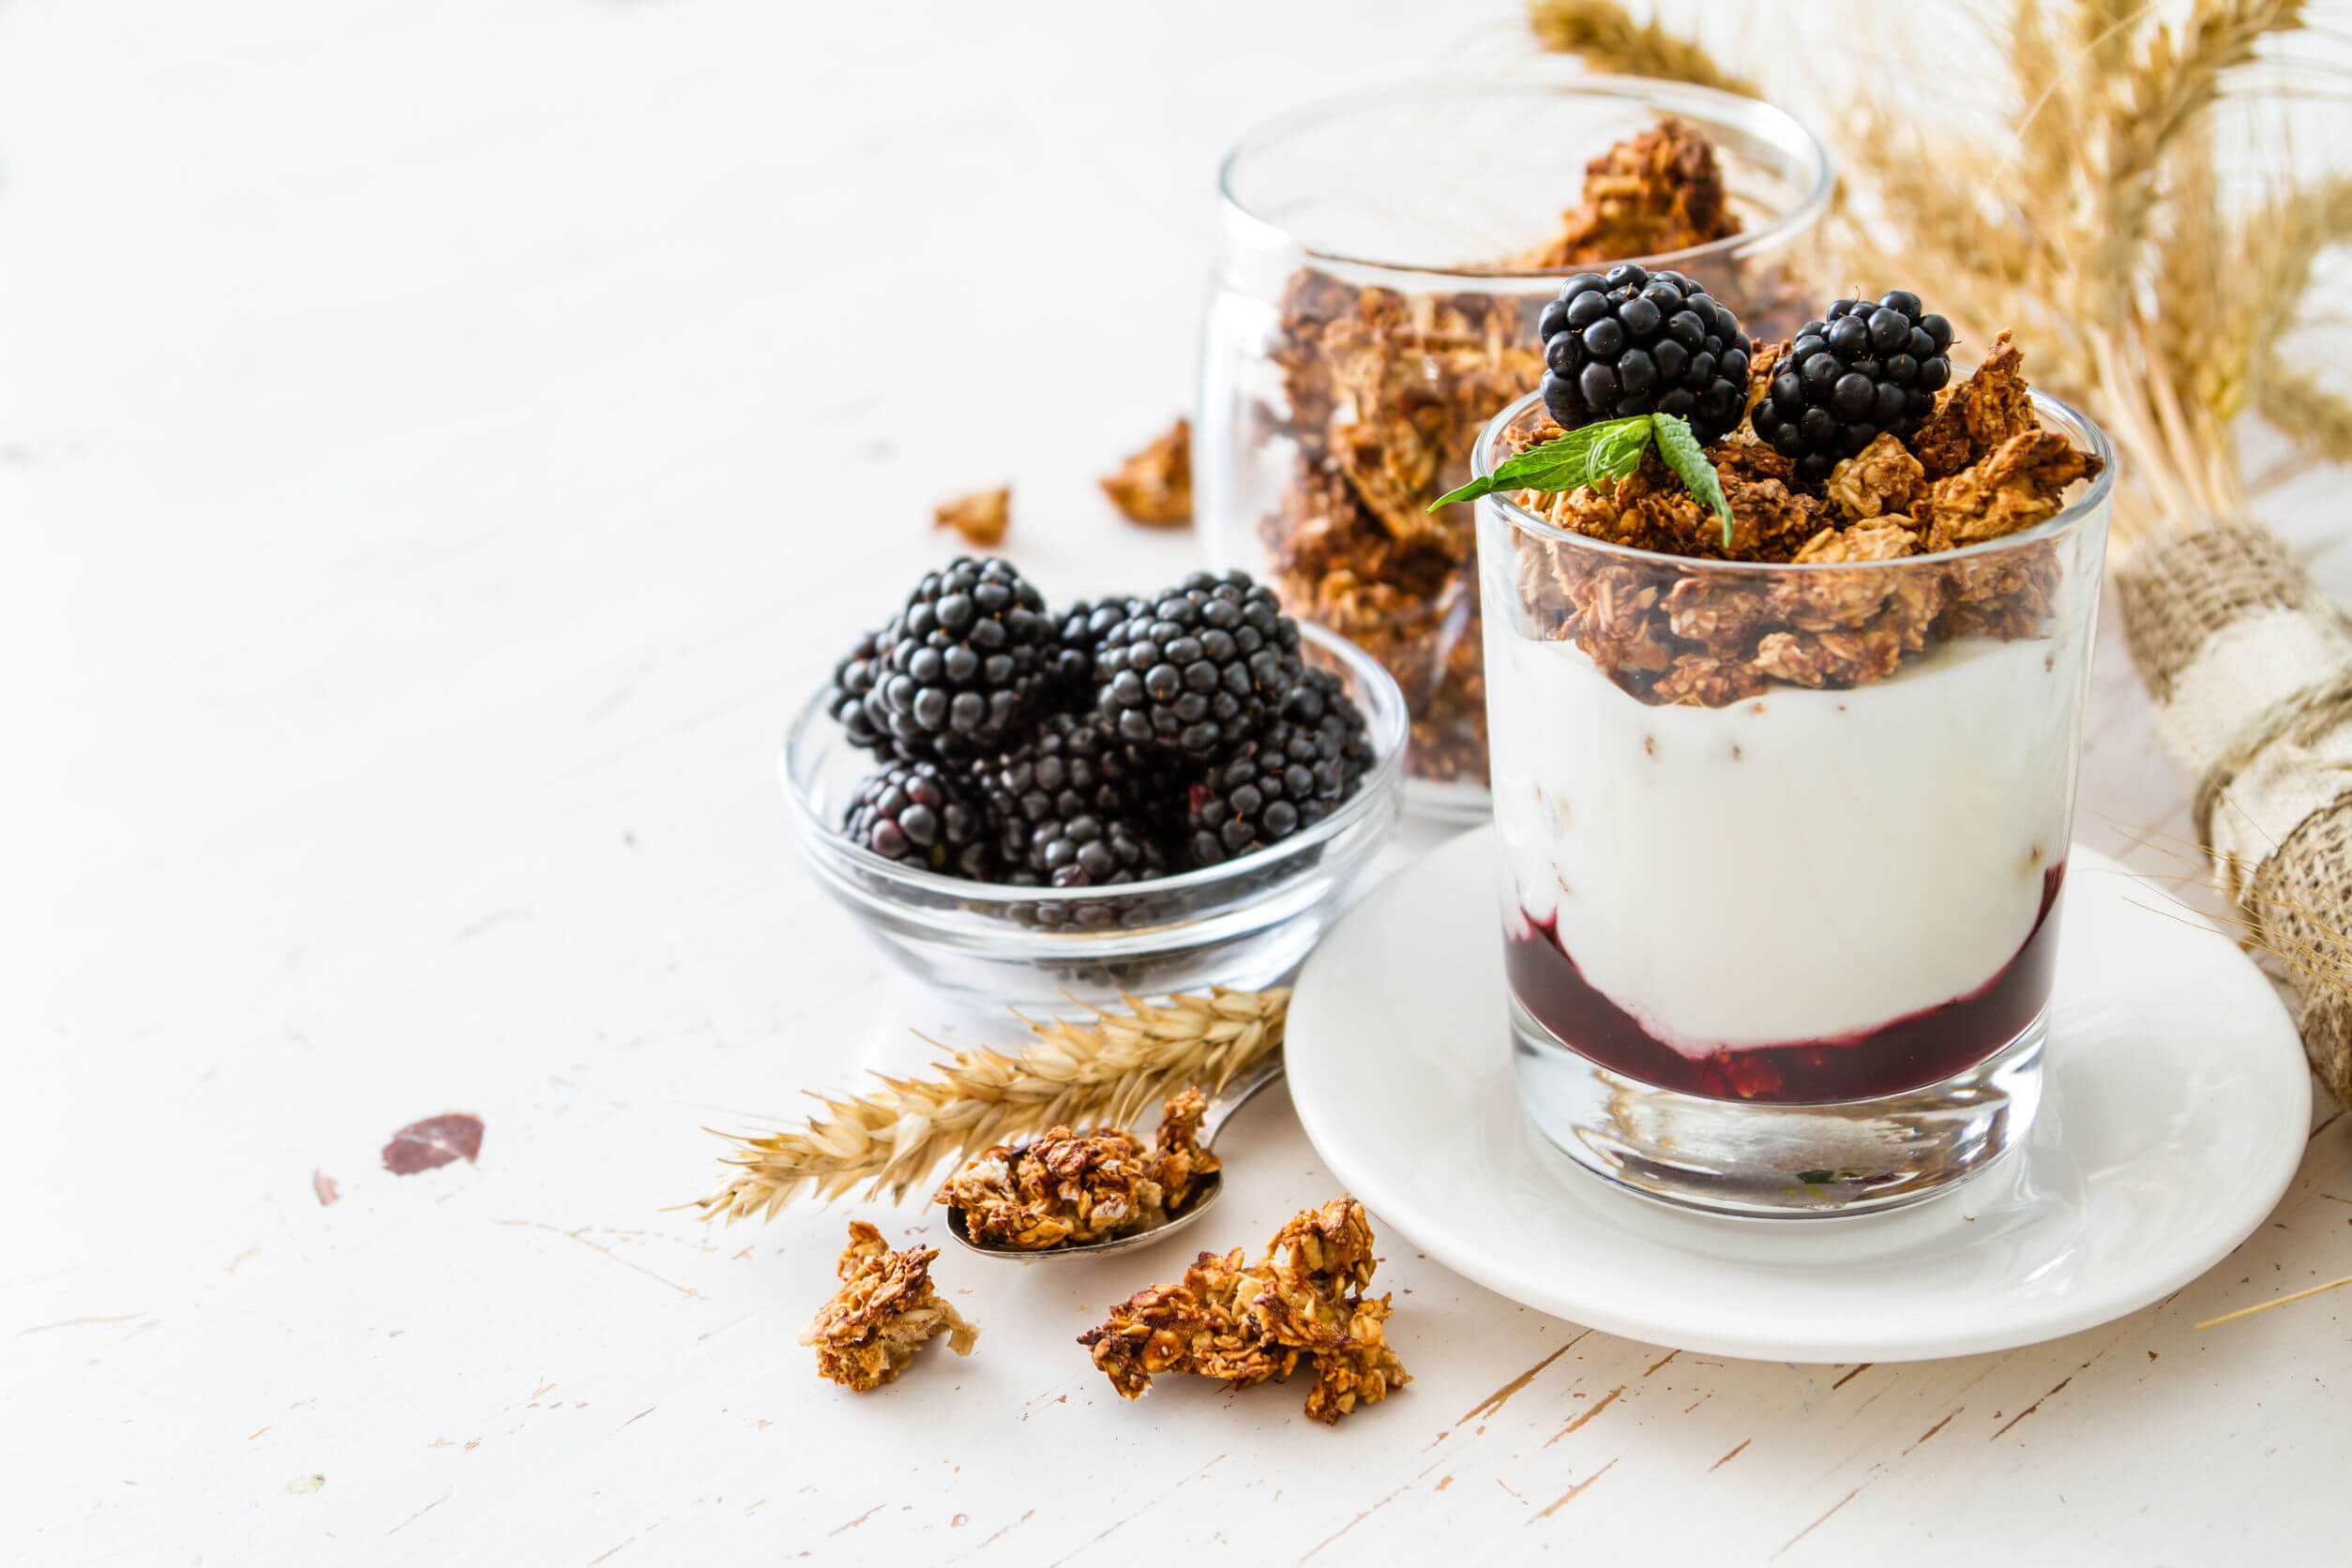 The most enjoyable healthy breakfasts are those that include yogurt.